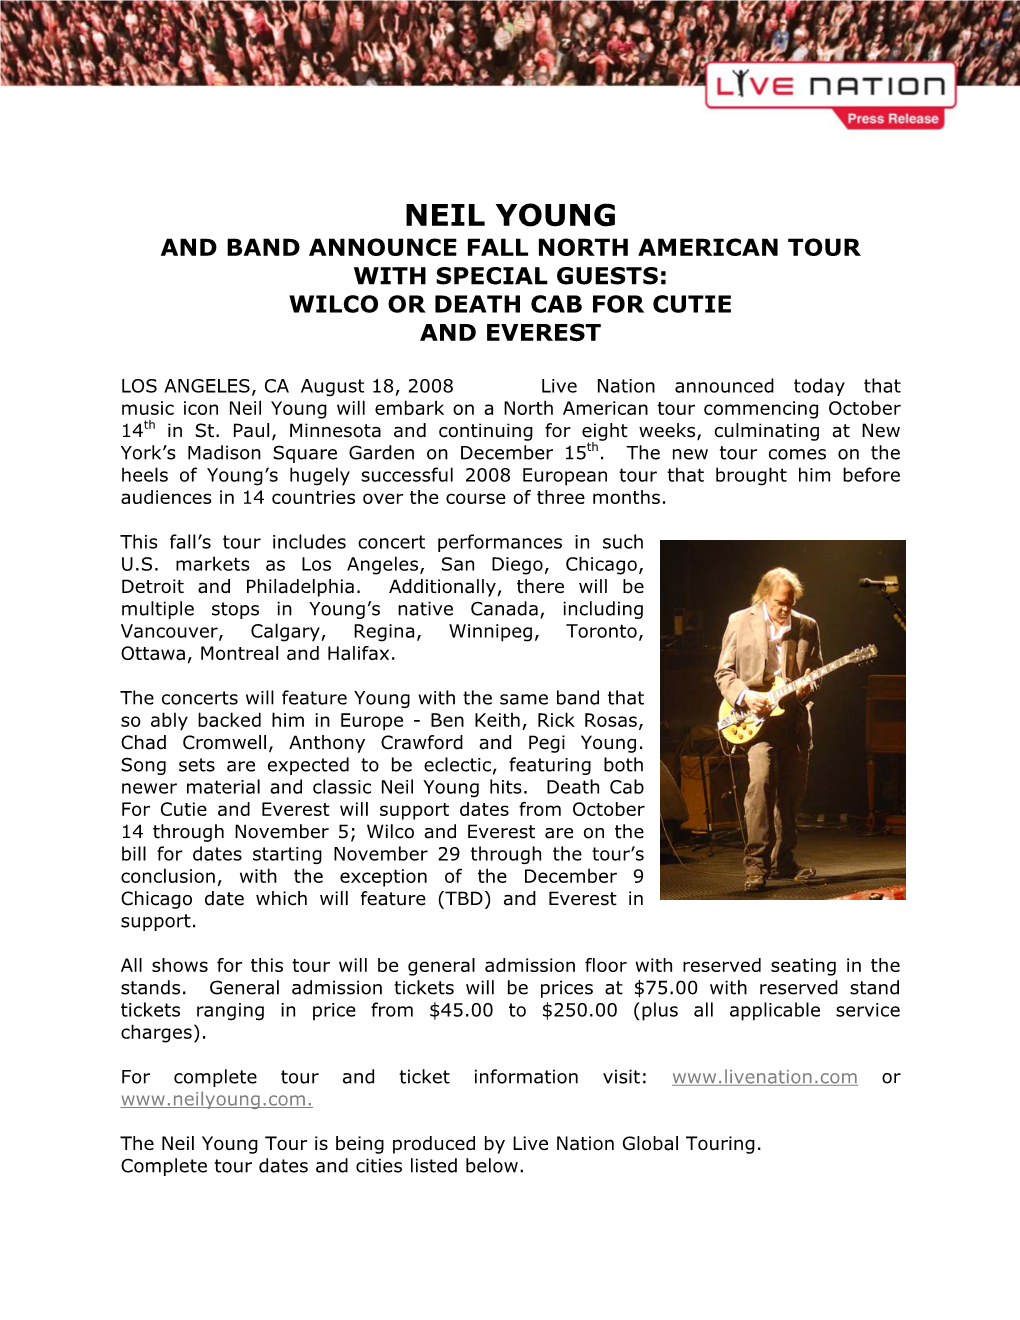 Neil Young and Band Announce Fall North American Tour with Special Guests: Wilco Or Death Cab for Cutie and Everest